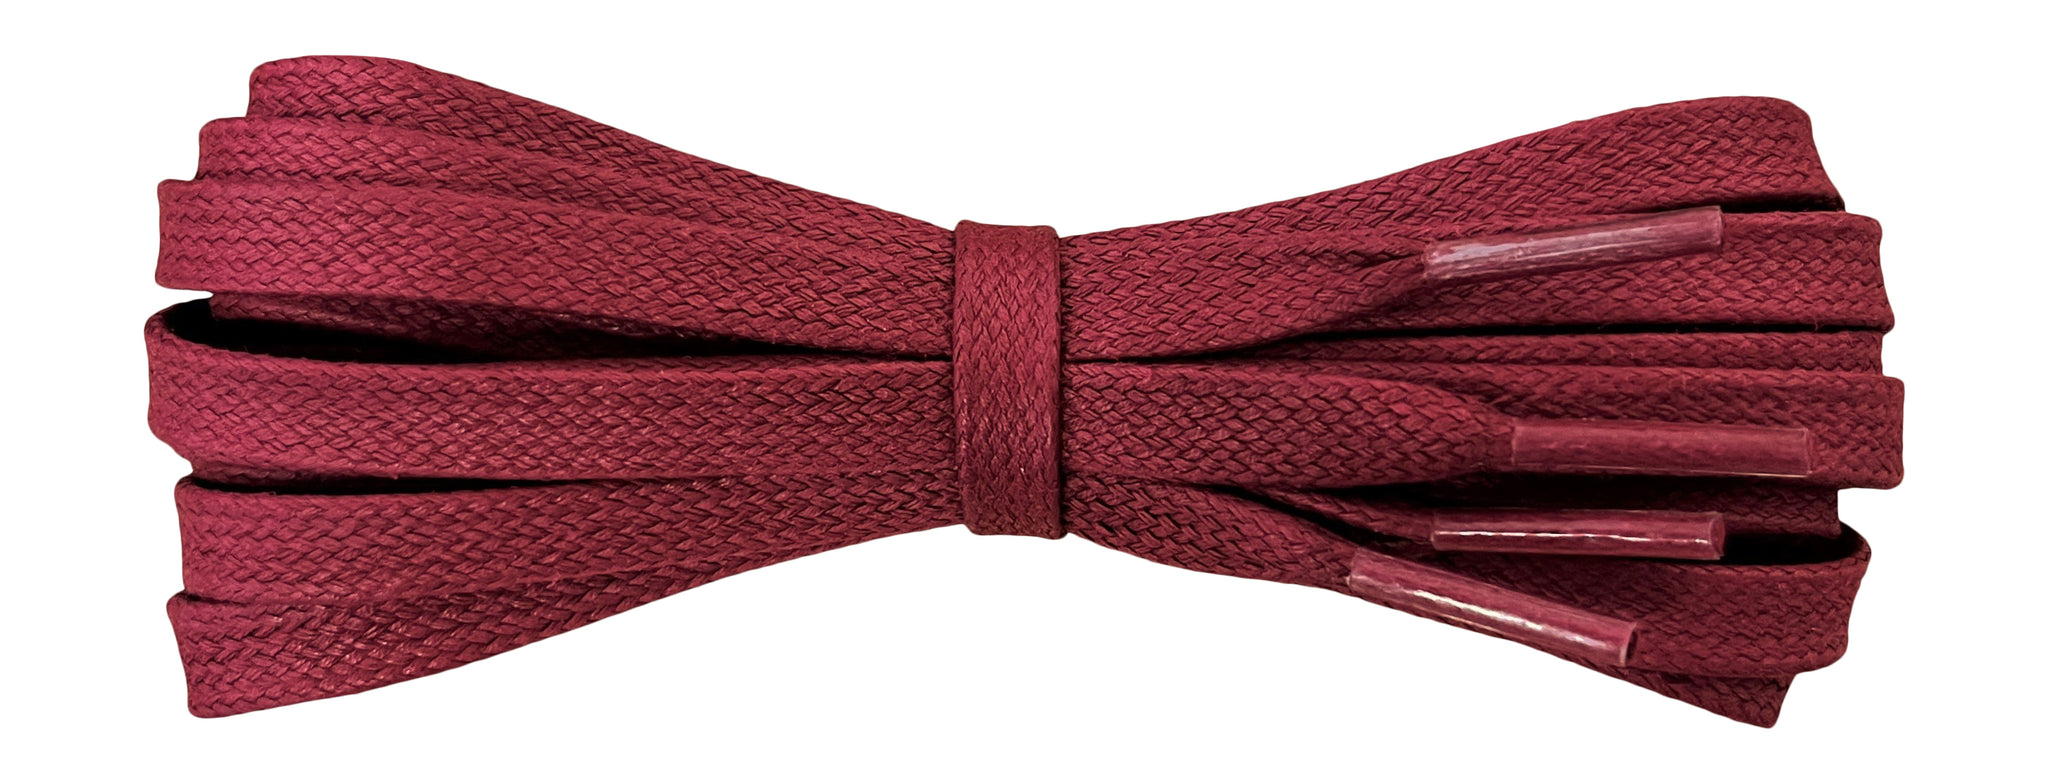 8 mm Flat Burgundy waxed cotton boot laces - fabmania shoe laces